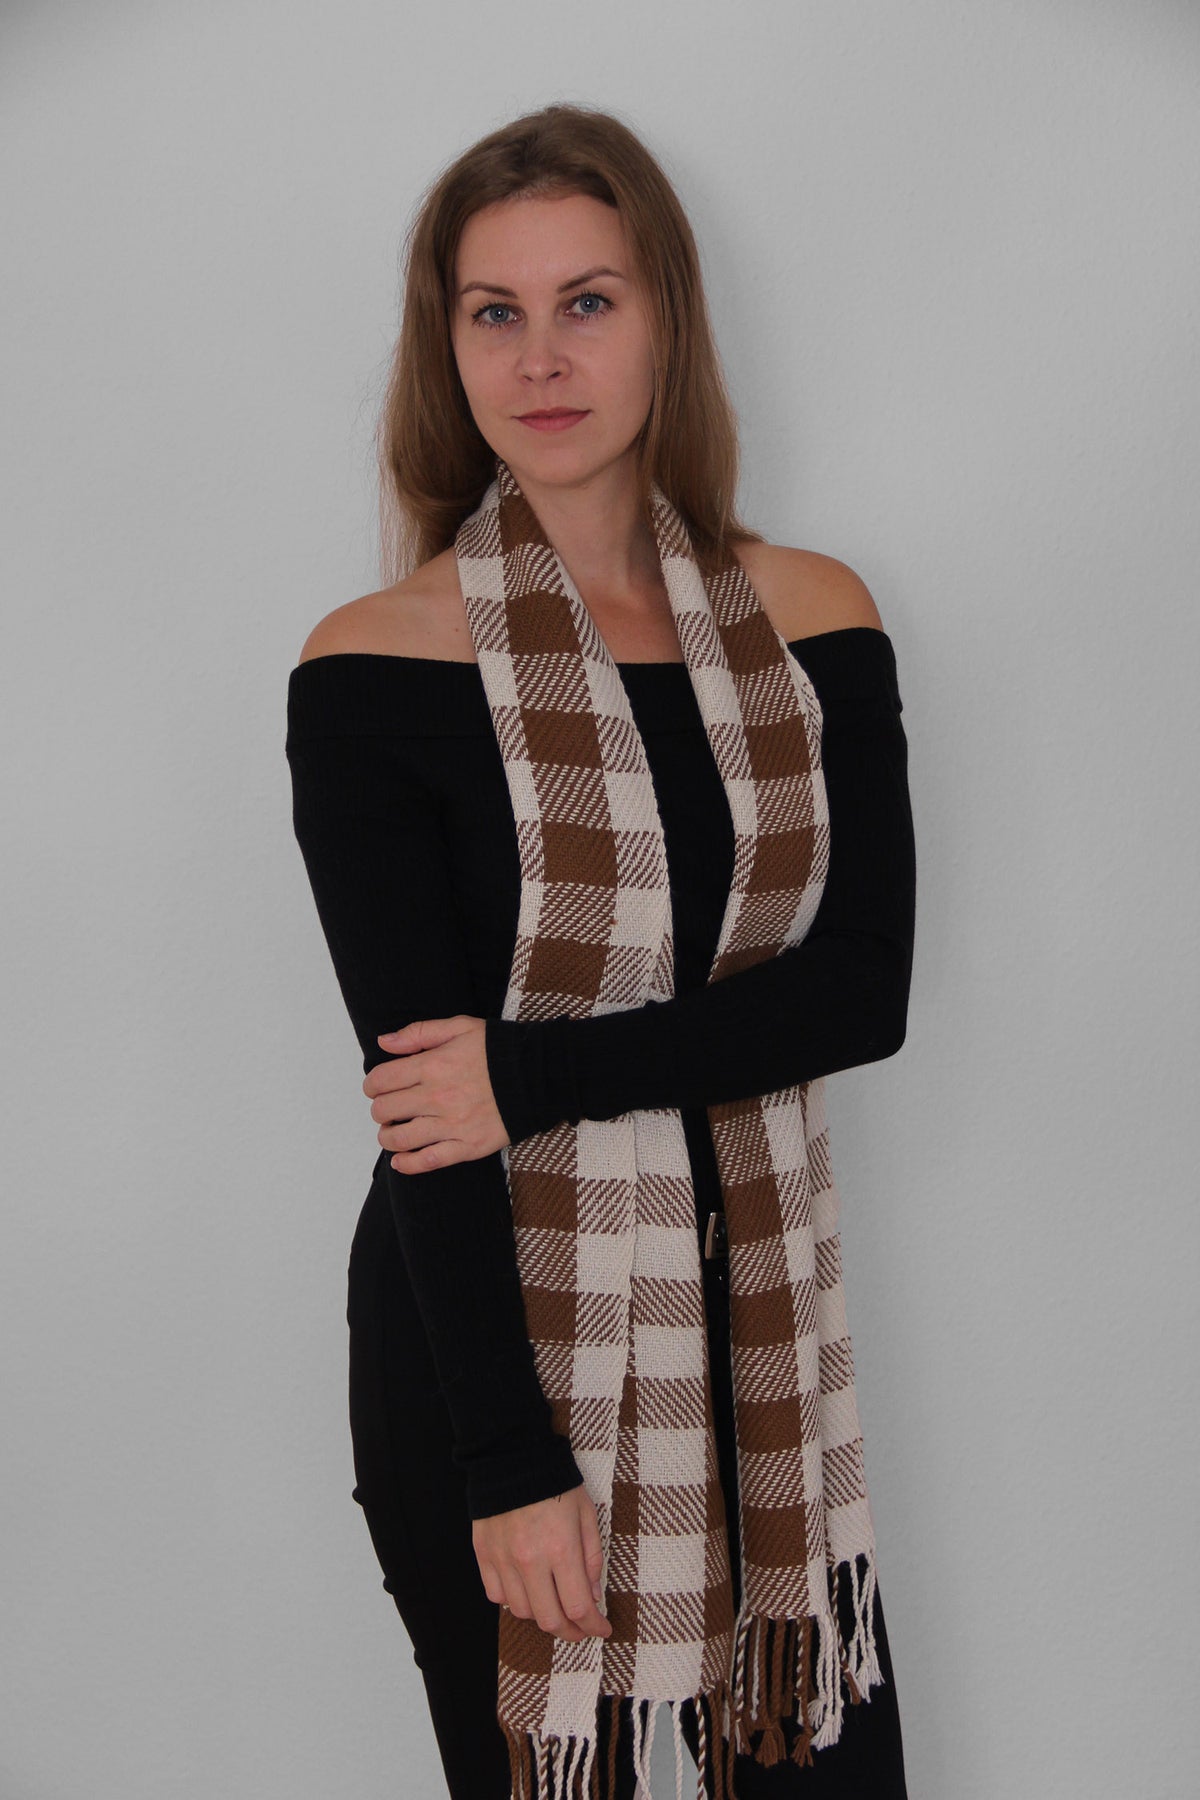 A woman using an Alpaca Scarf in brown and white colours.